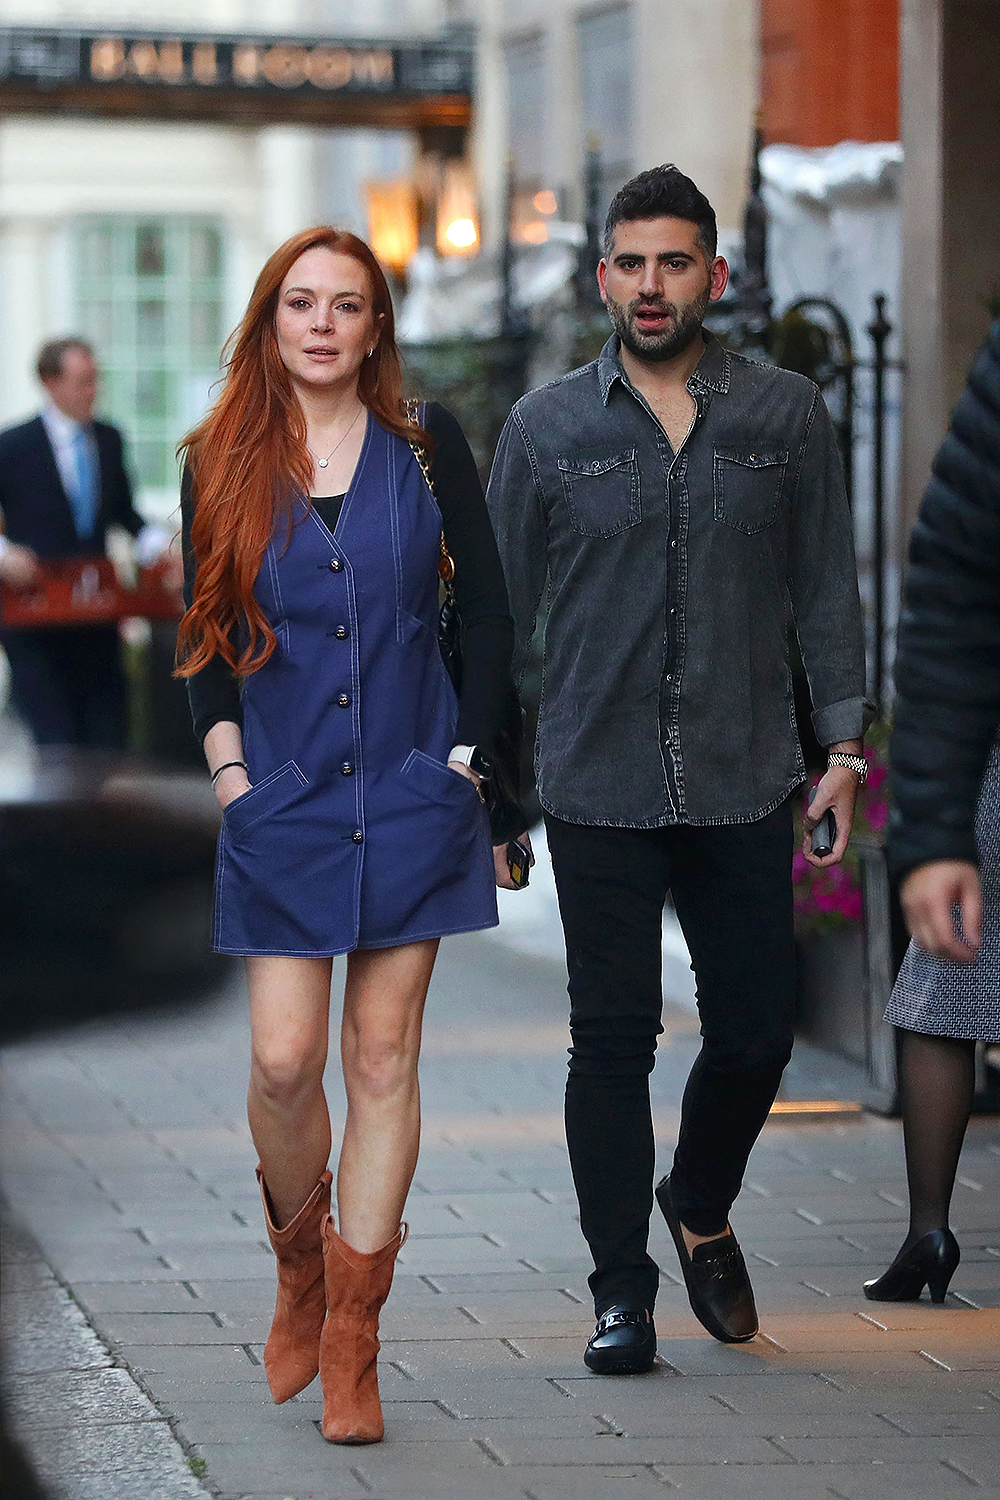 Lindsay Lohan and Bader Shammas Photos Of The Married Couple picture